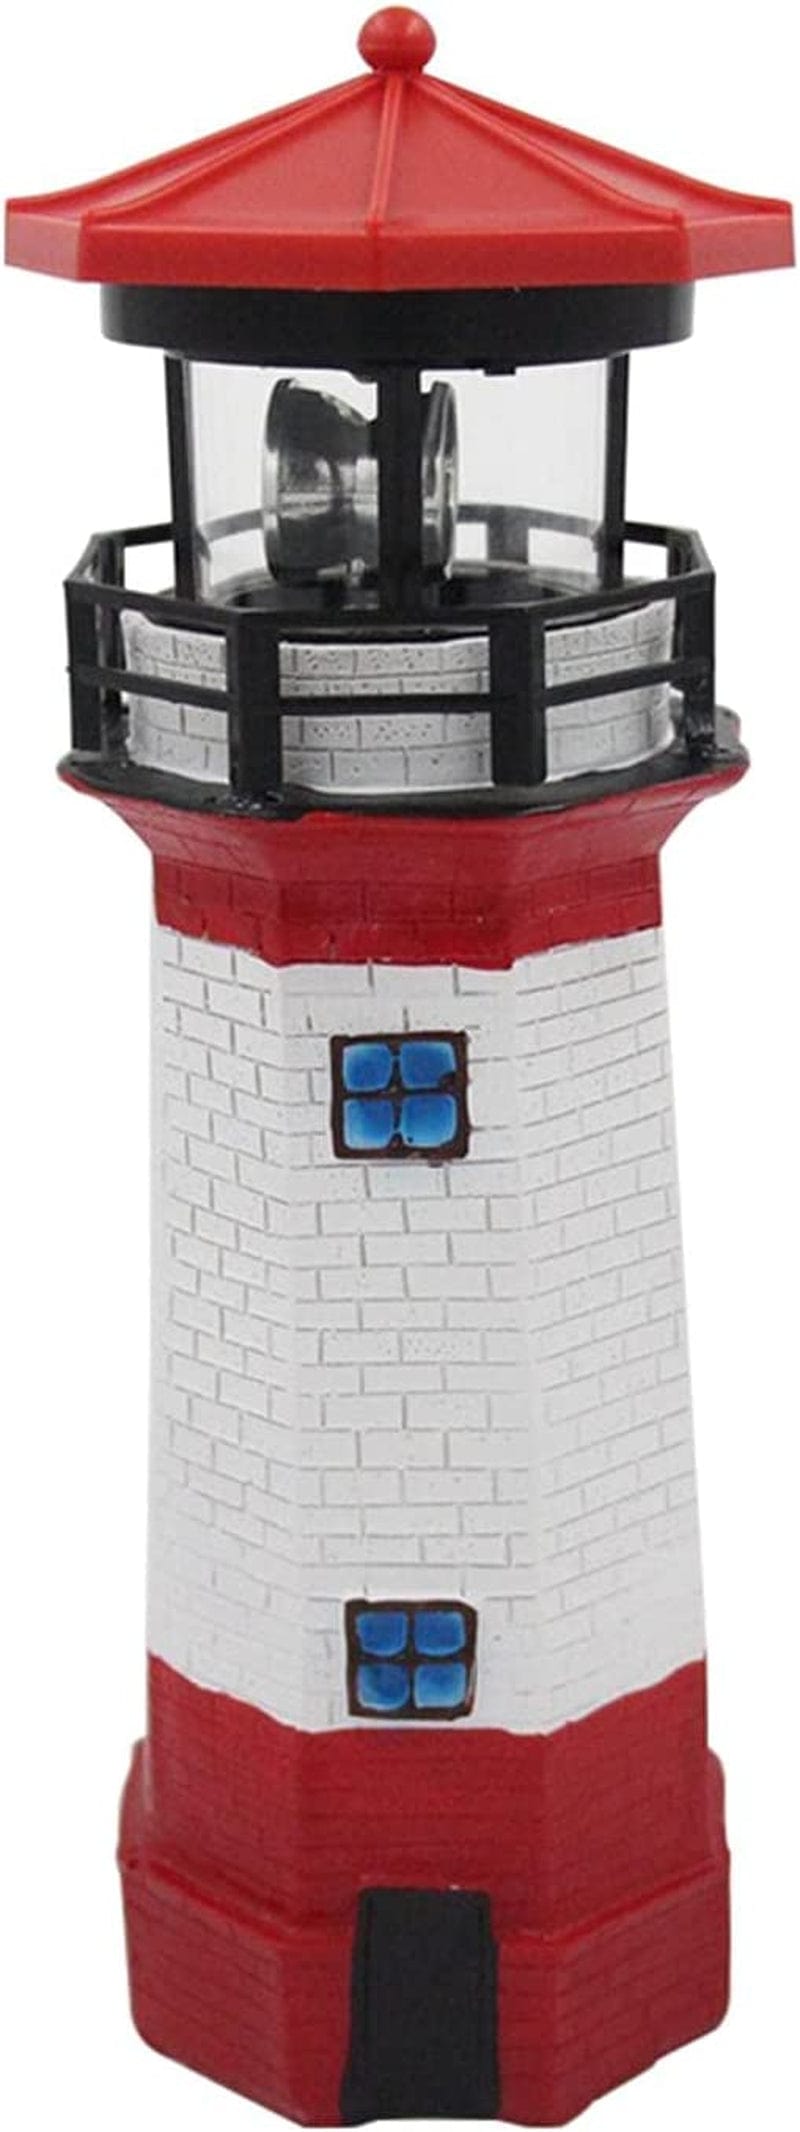 GEZICHTA Solar Lighthouse Garden Statue with Rotating Lamp, 27Cm Resin Solar Lighthouse Sculpture Waterproof Garden Ornaments Outdoor LED Waterproof Solar Led Lamp for Yard Lawn Patio(Red), Free Size